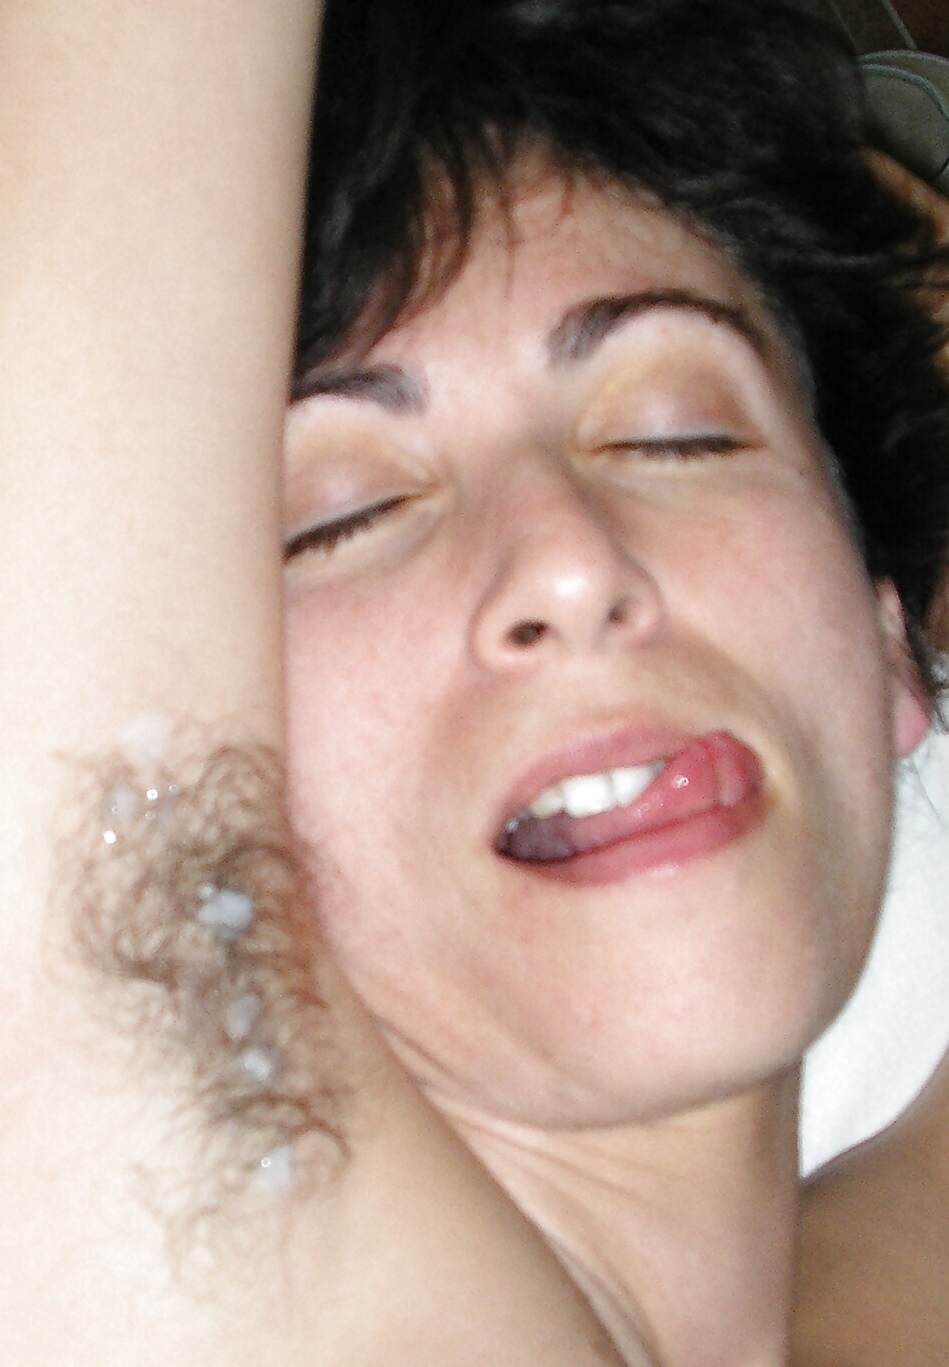 Porn image Amateur hairy armpits spreading - pits - Love is in the hair